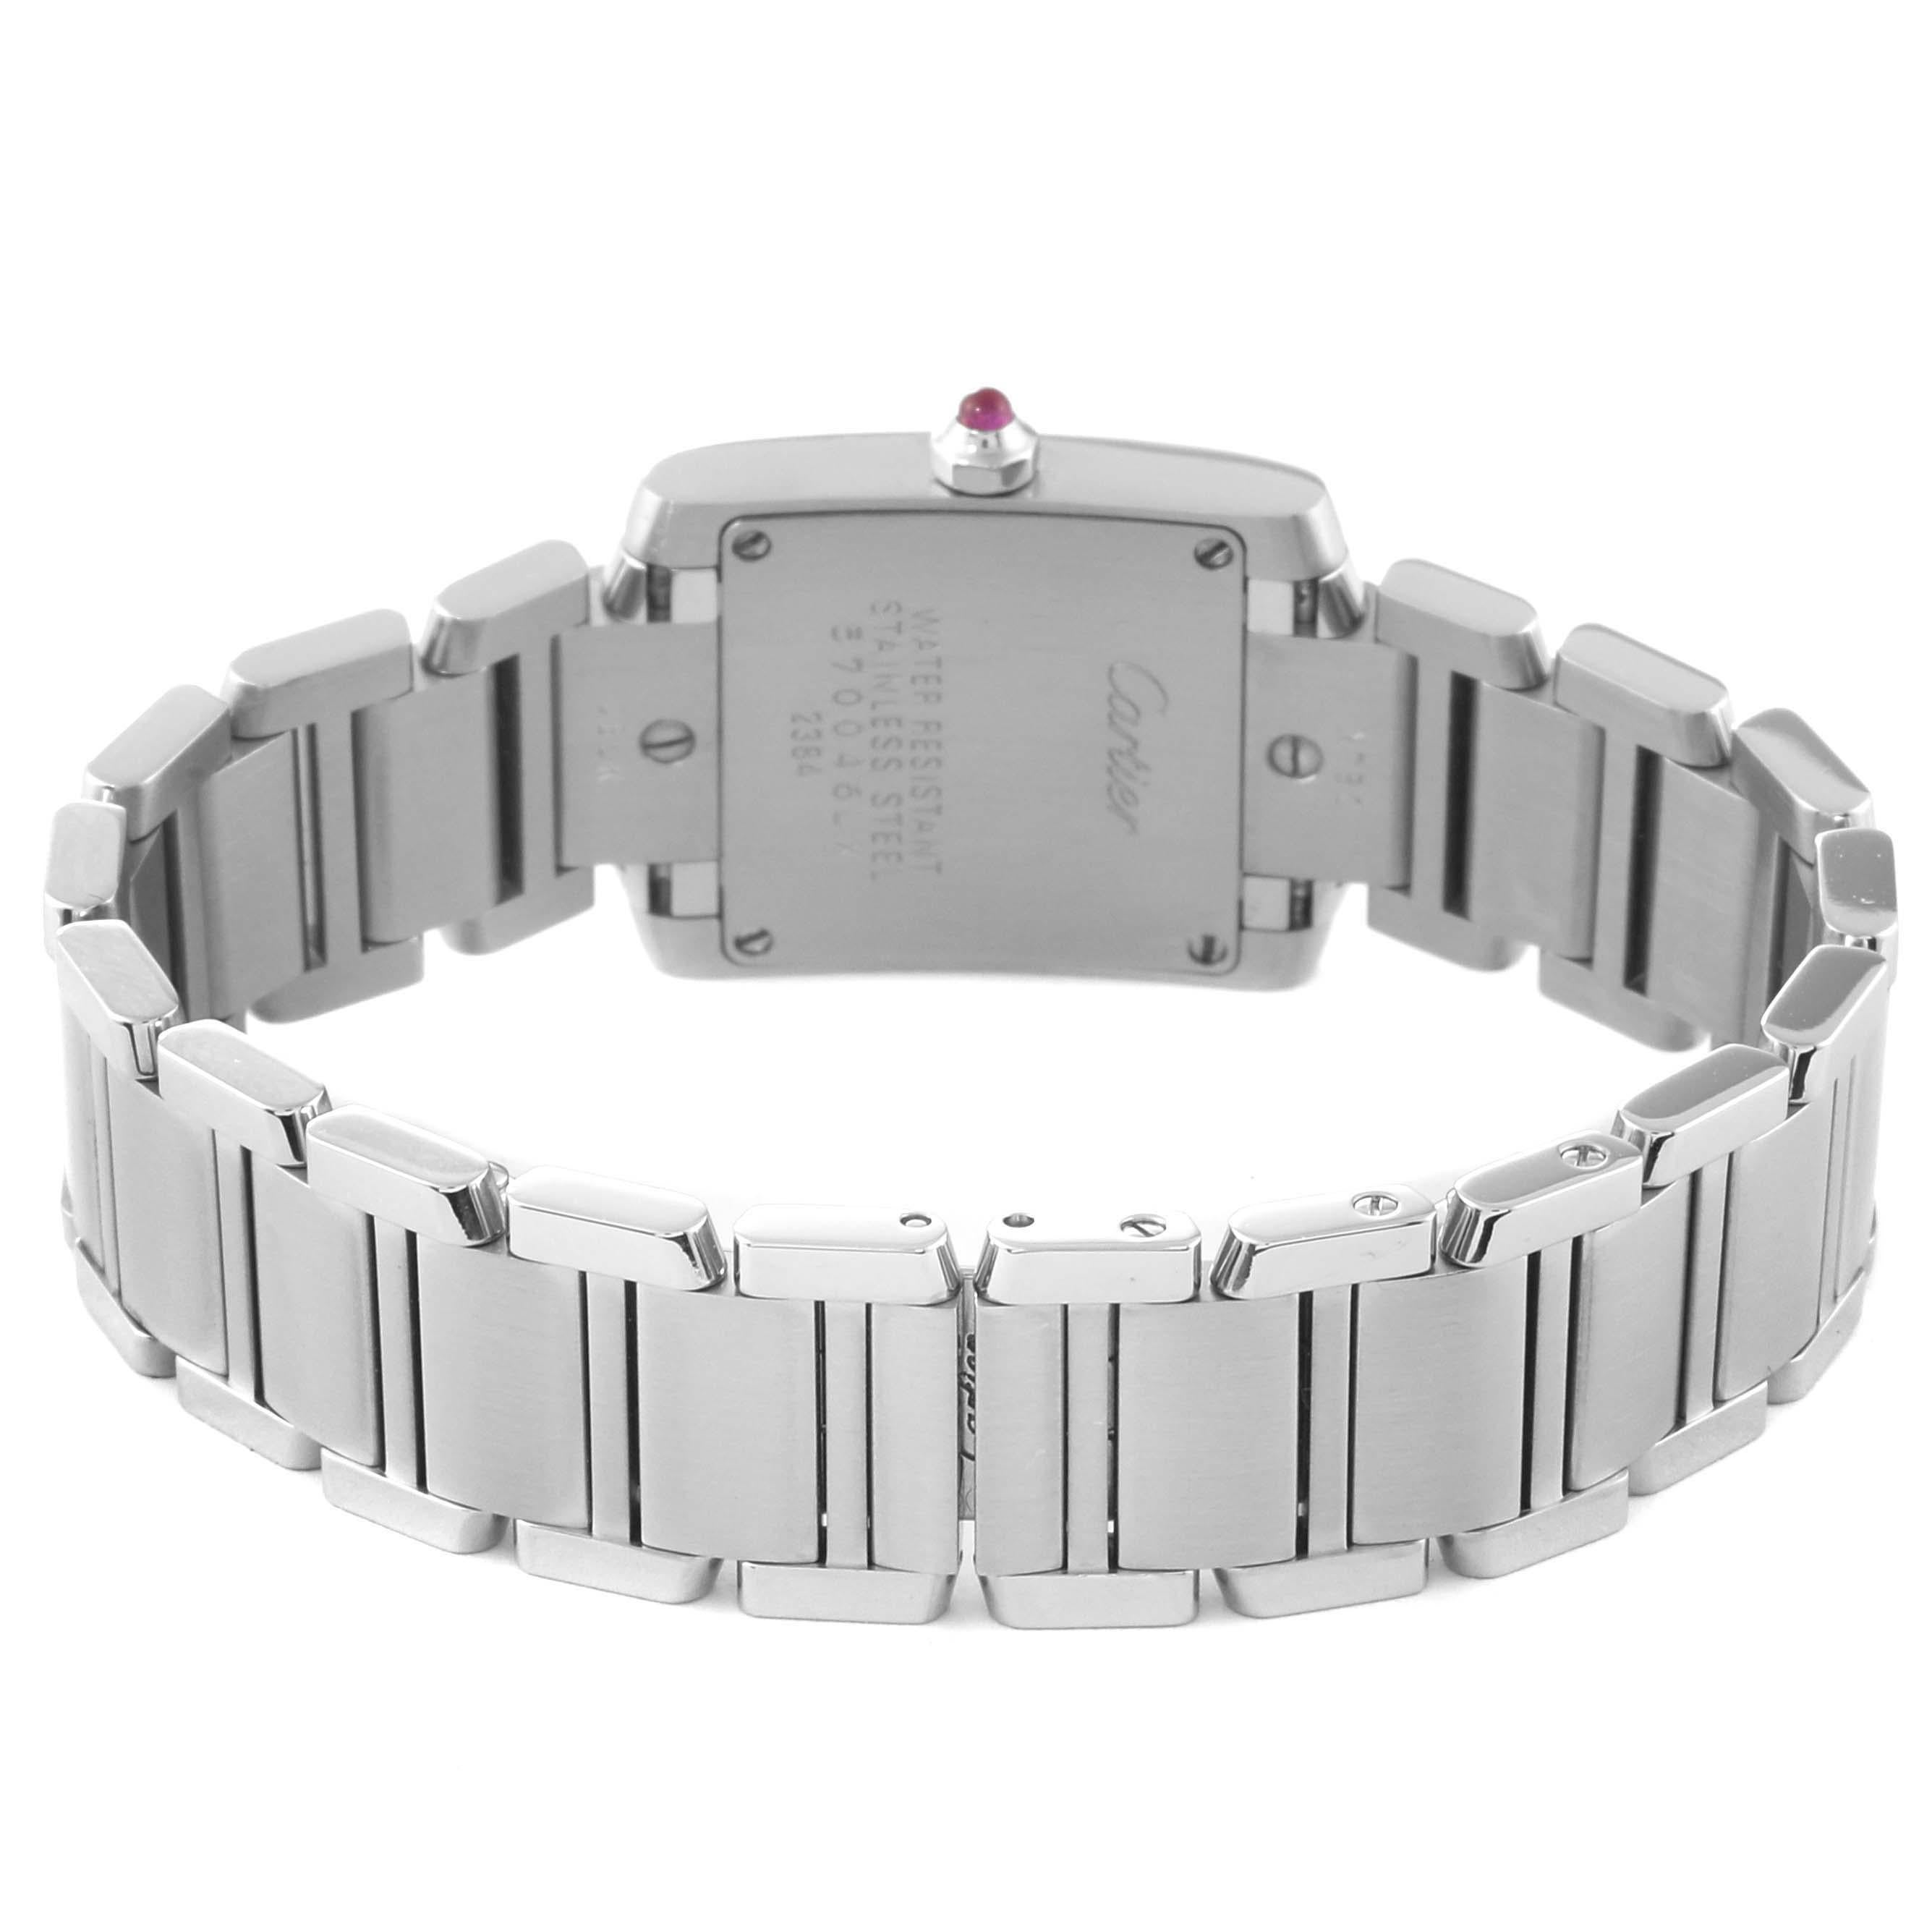 Cartier Tank Francaise Raspberry Dial LE Steel Ladies Watch W51030Q3. Quartz movement. Rectangular stainless steel 20.0 x 25.0 mm case. Octagonal crown set with a pink spinel cabochon. . Scratch resistant sapphire crystal. Raspberry dial with white